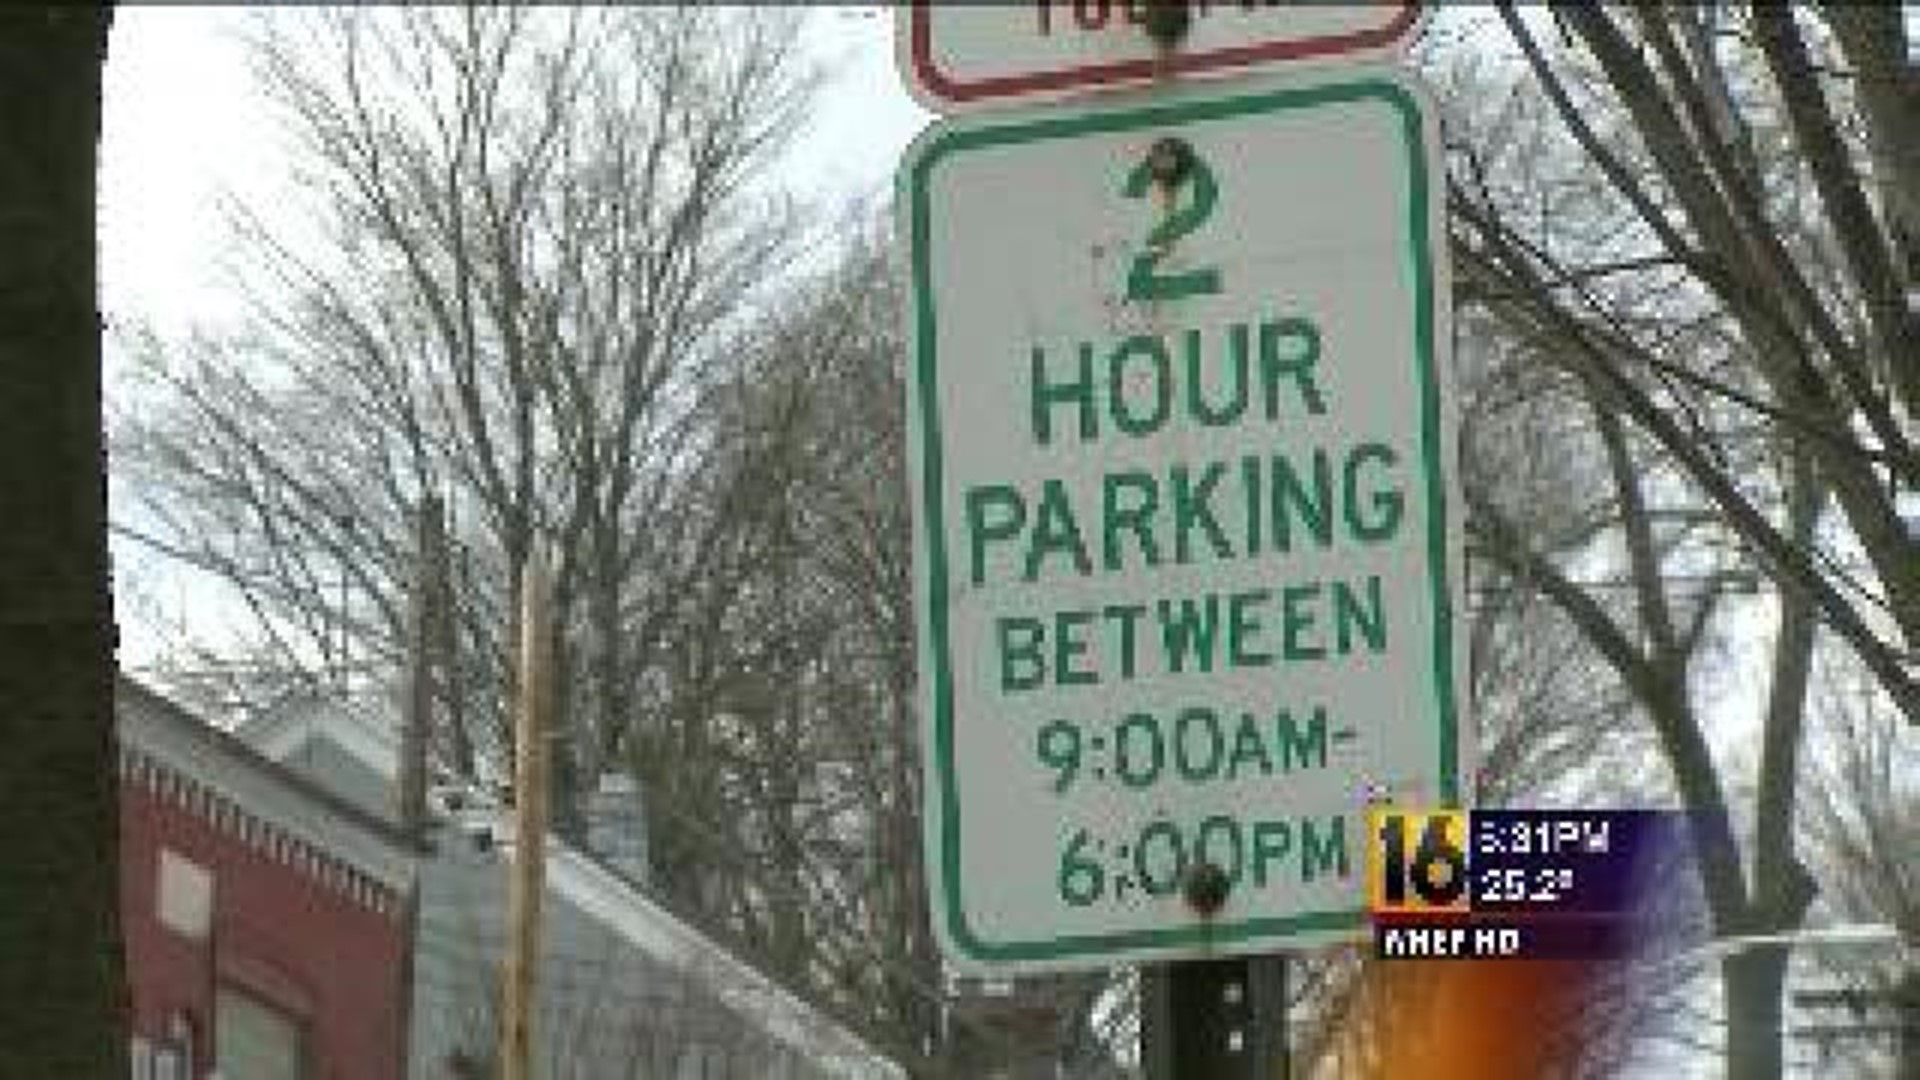 Parking Crackdown in Tunkhannock